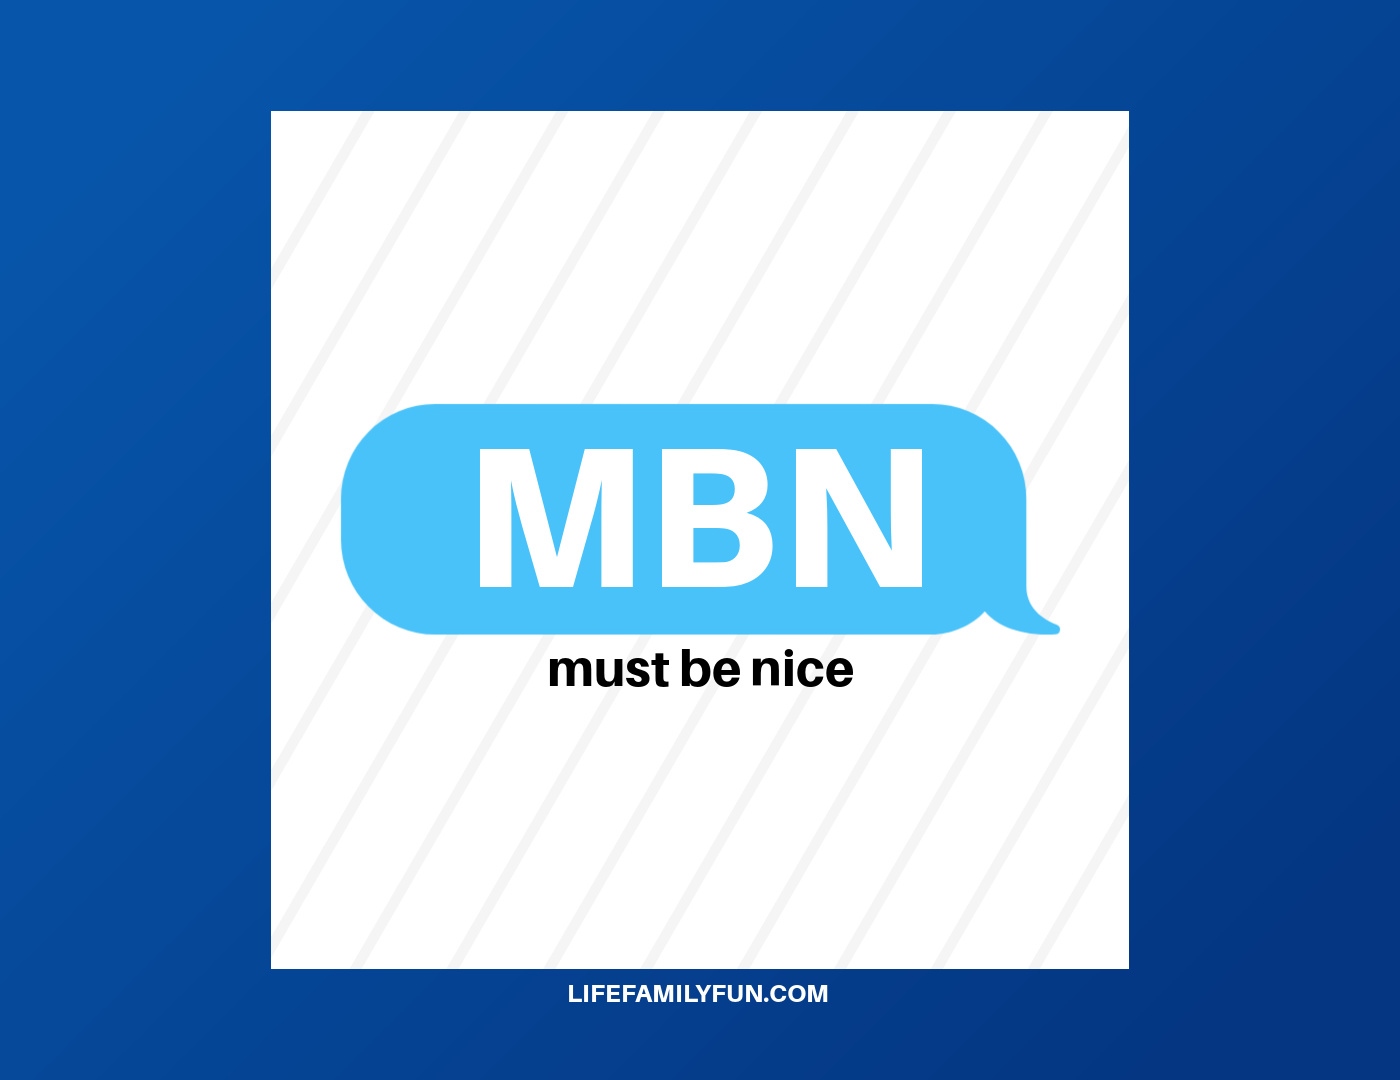 What does MBN mean?